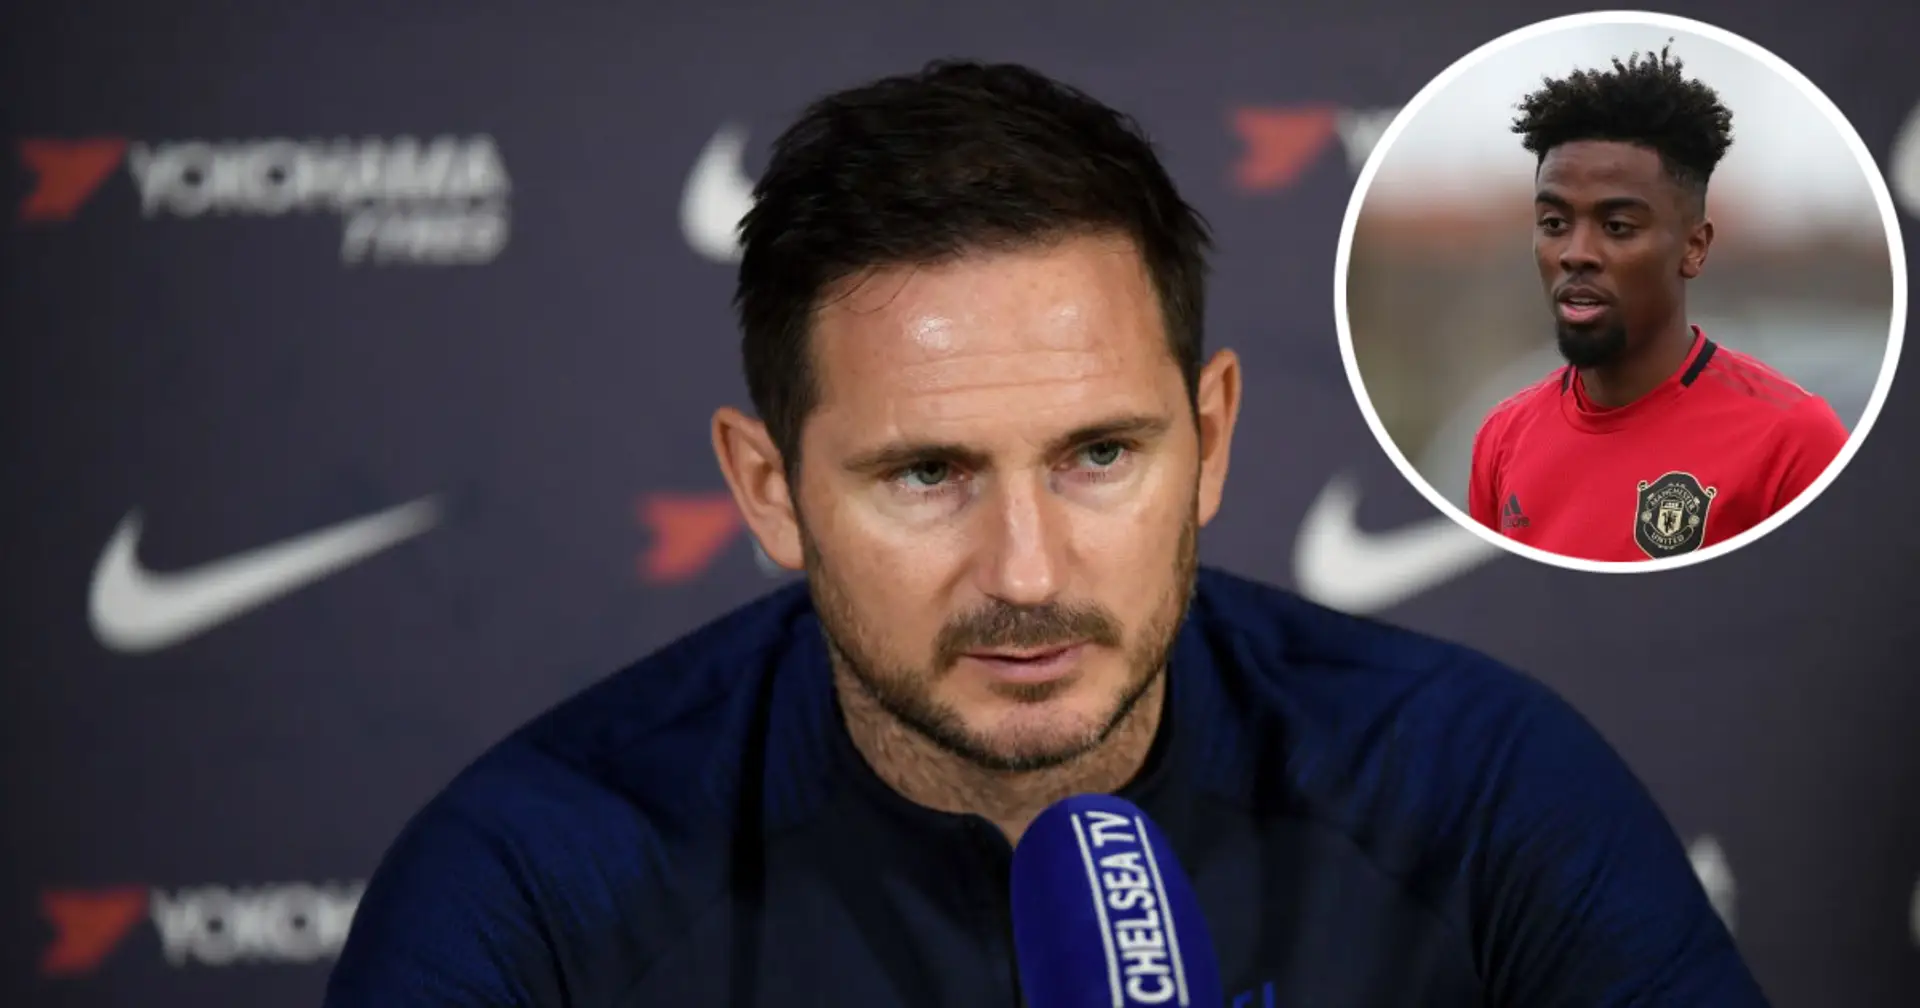 'It's never been mentioned on my end': Frank Lampard plays down Angel Gomes links